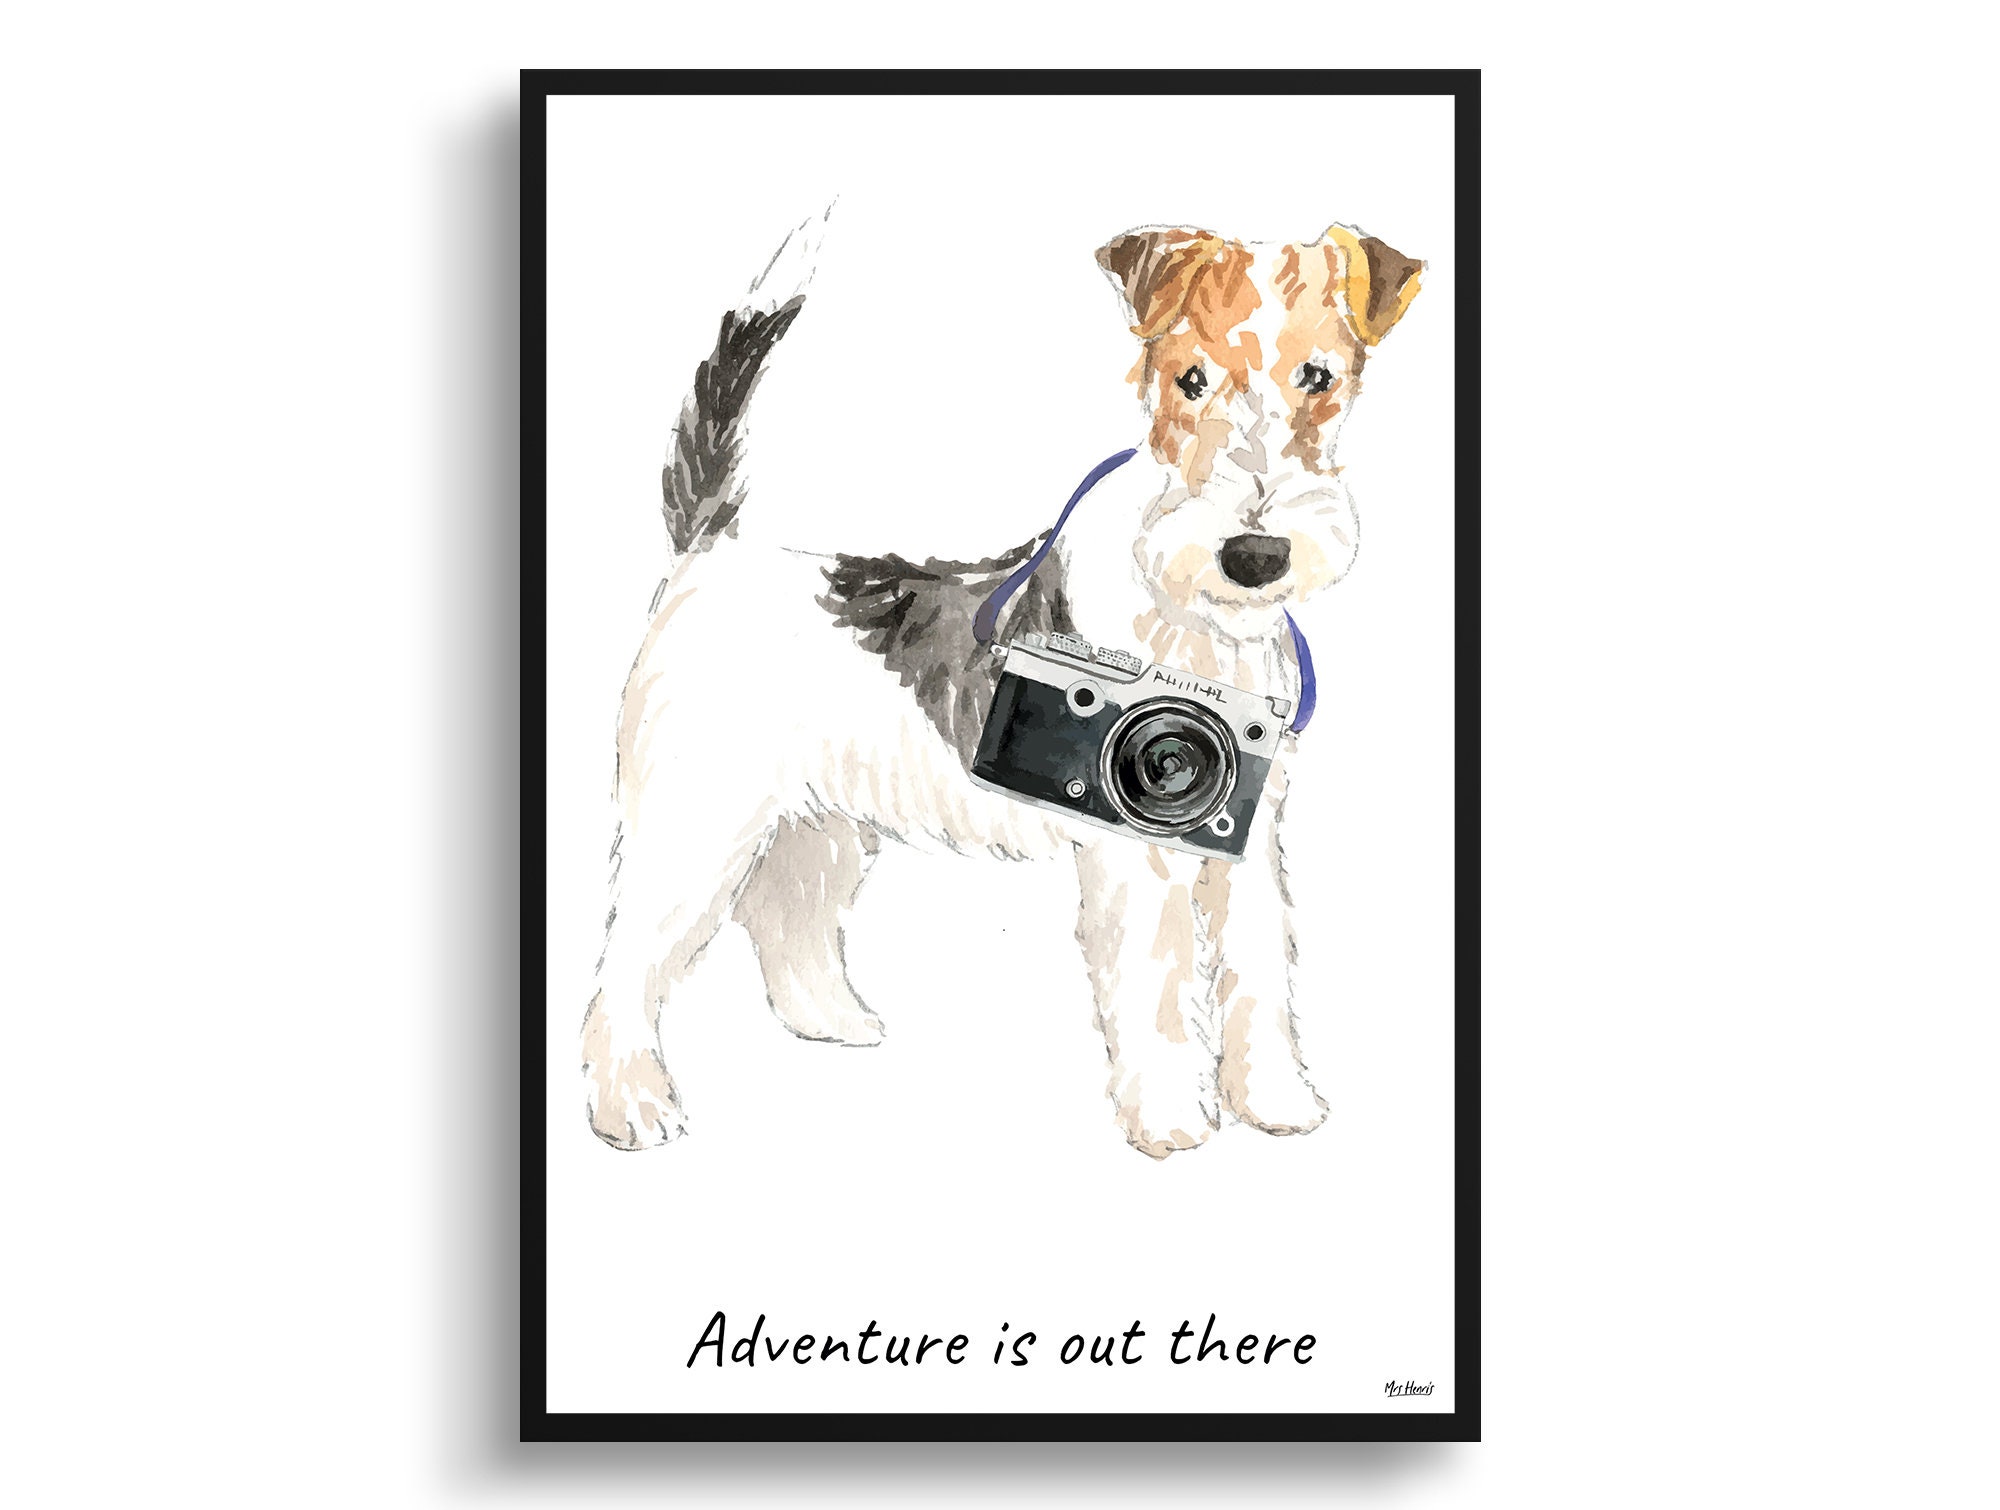 Adventure Is Out There Wire Haired Fox Terrier Dog Print Illustration. Framed & Un-Framed Wall Art Options. Personalised Name